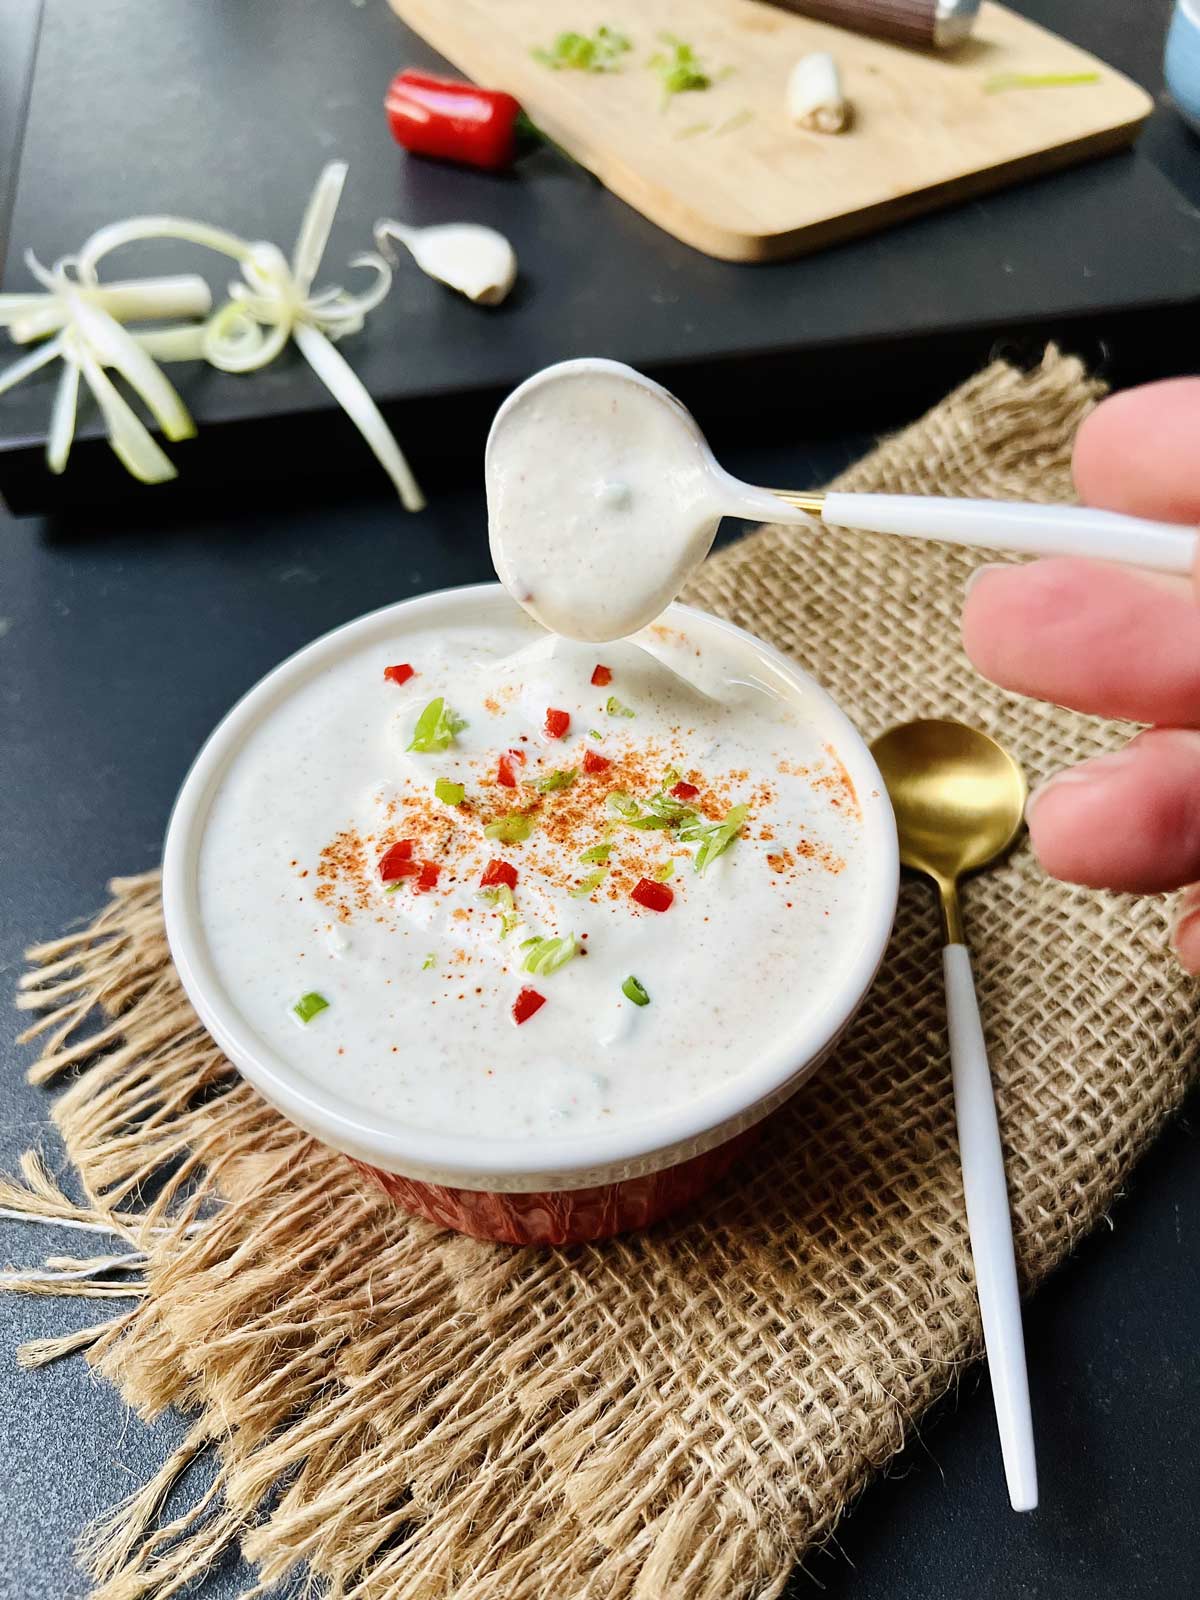 Sour cream sauce in red ceramic serving bowl with scallions, red pepper, and a dash of Cayenne pepper sprinkled over.